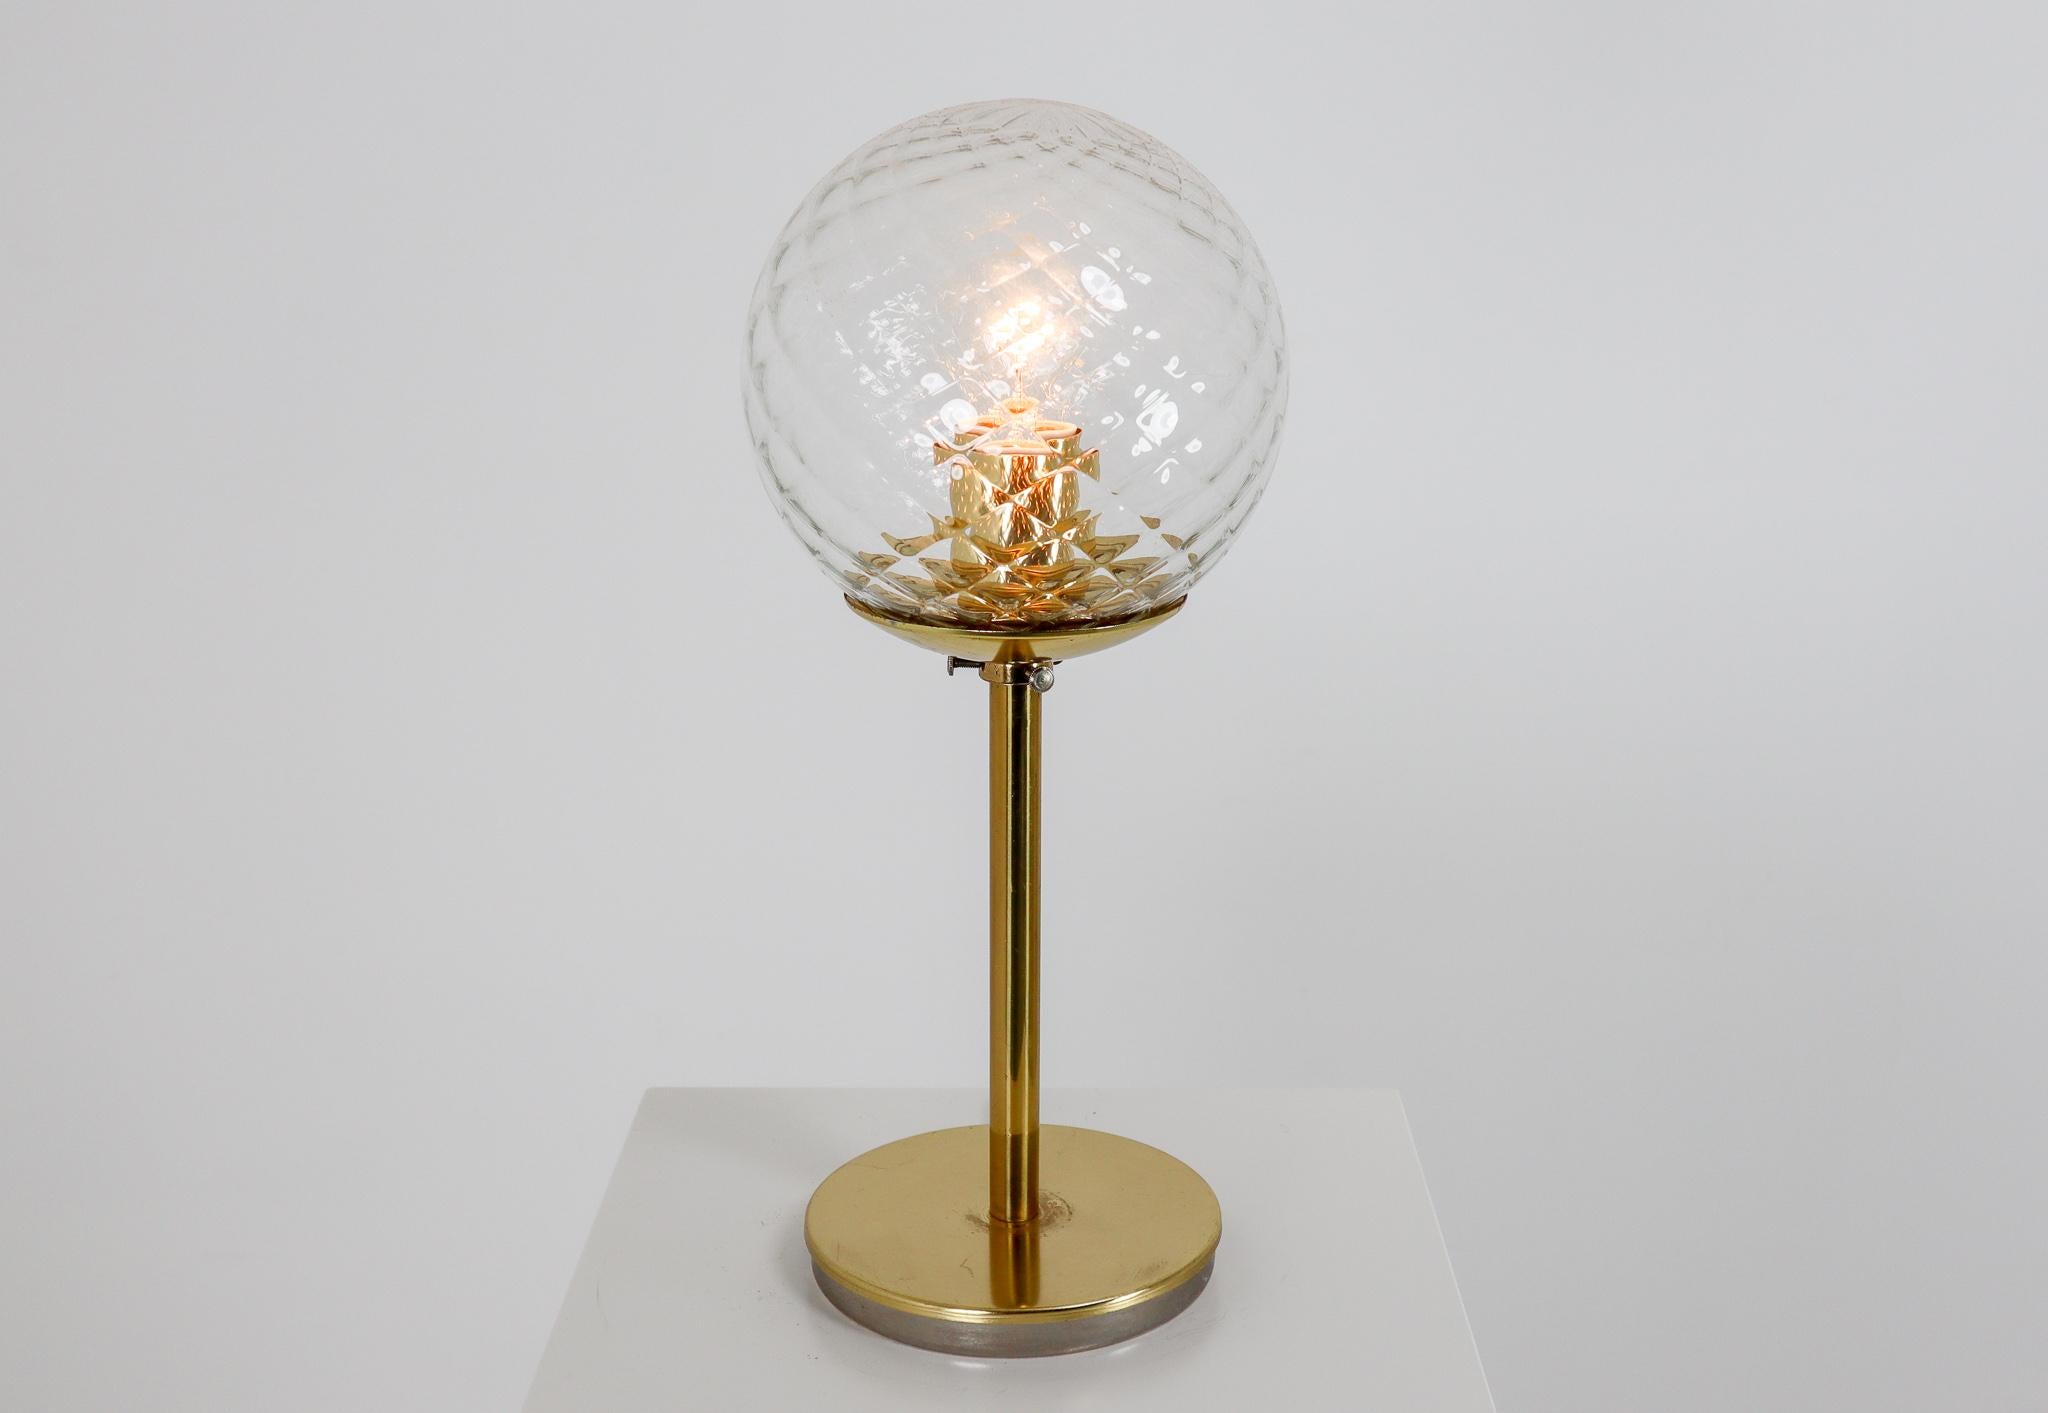 European midcentury table lamps in brass and structure glass globes. The structure glass globes density that create a wonderful light effect. These table lamp will contribute to a luxurious character of the interior. Perfect original condition with